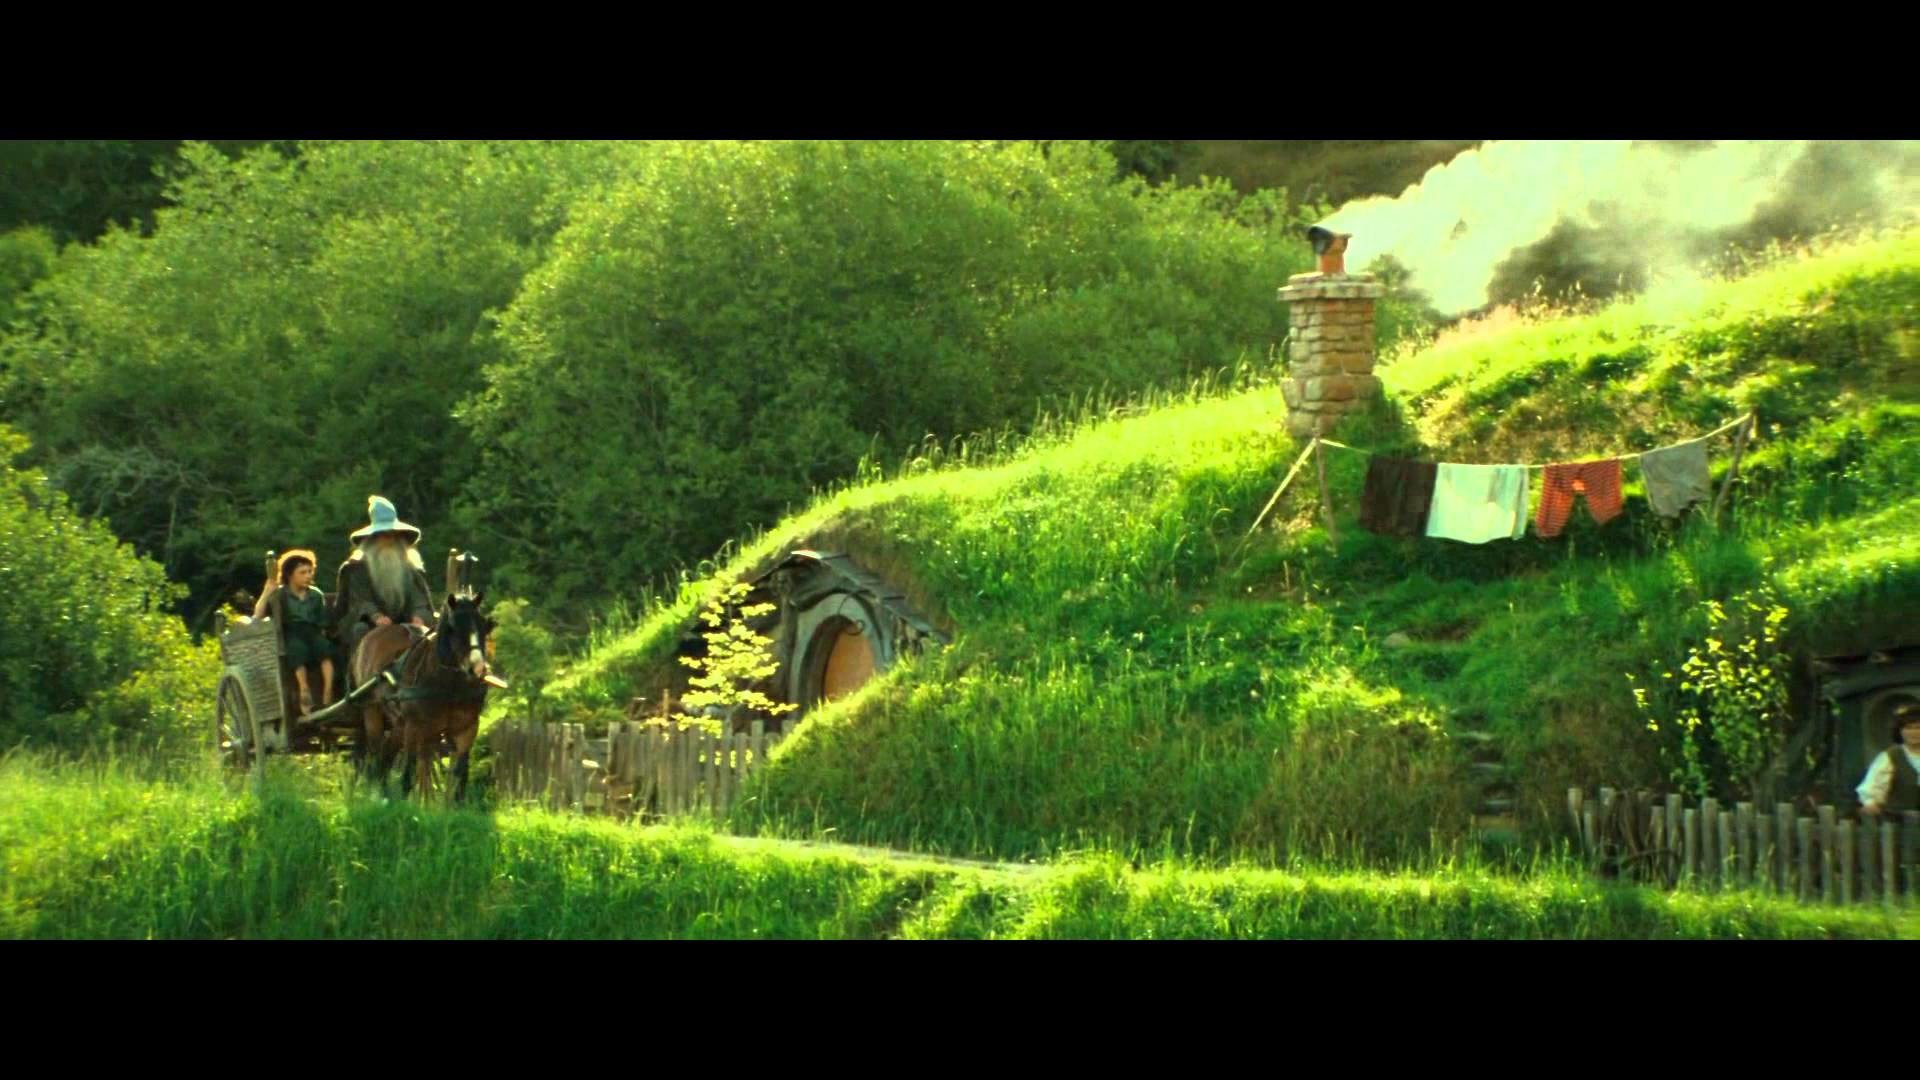 1920x1080 LOTR The Fellowship of the Ring - Extended Edition - The Shire